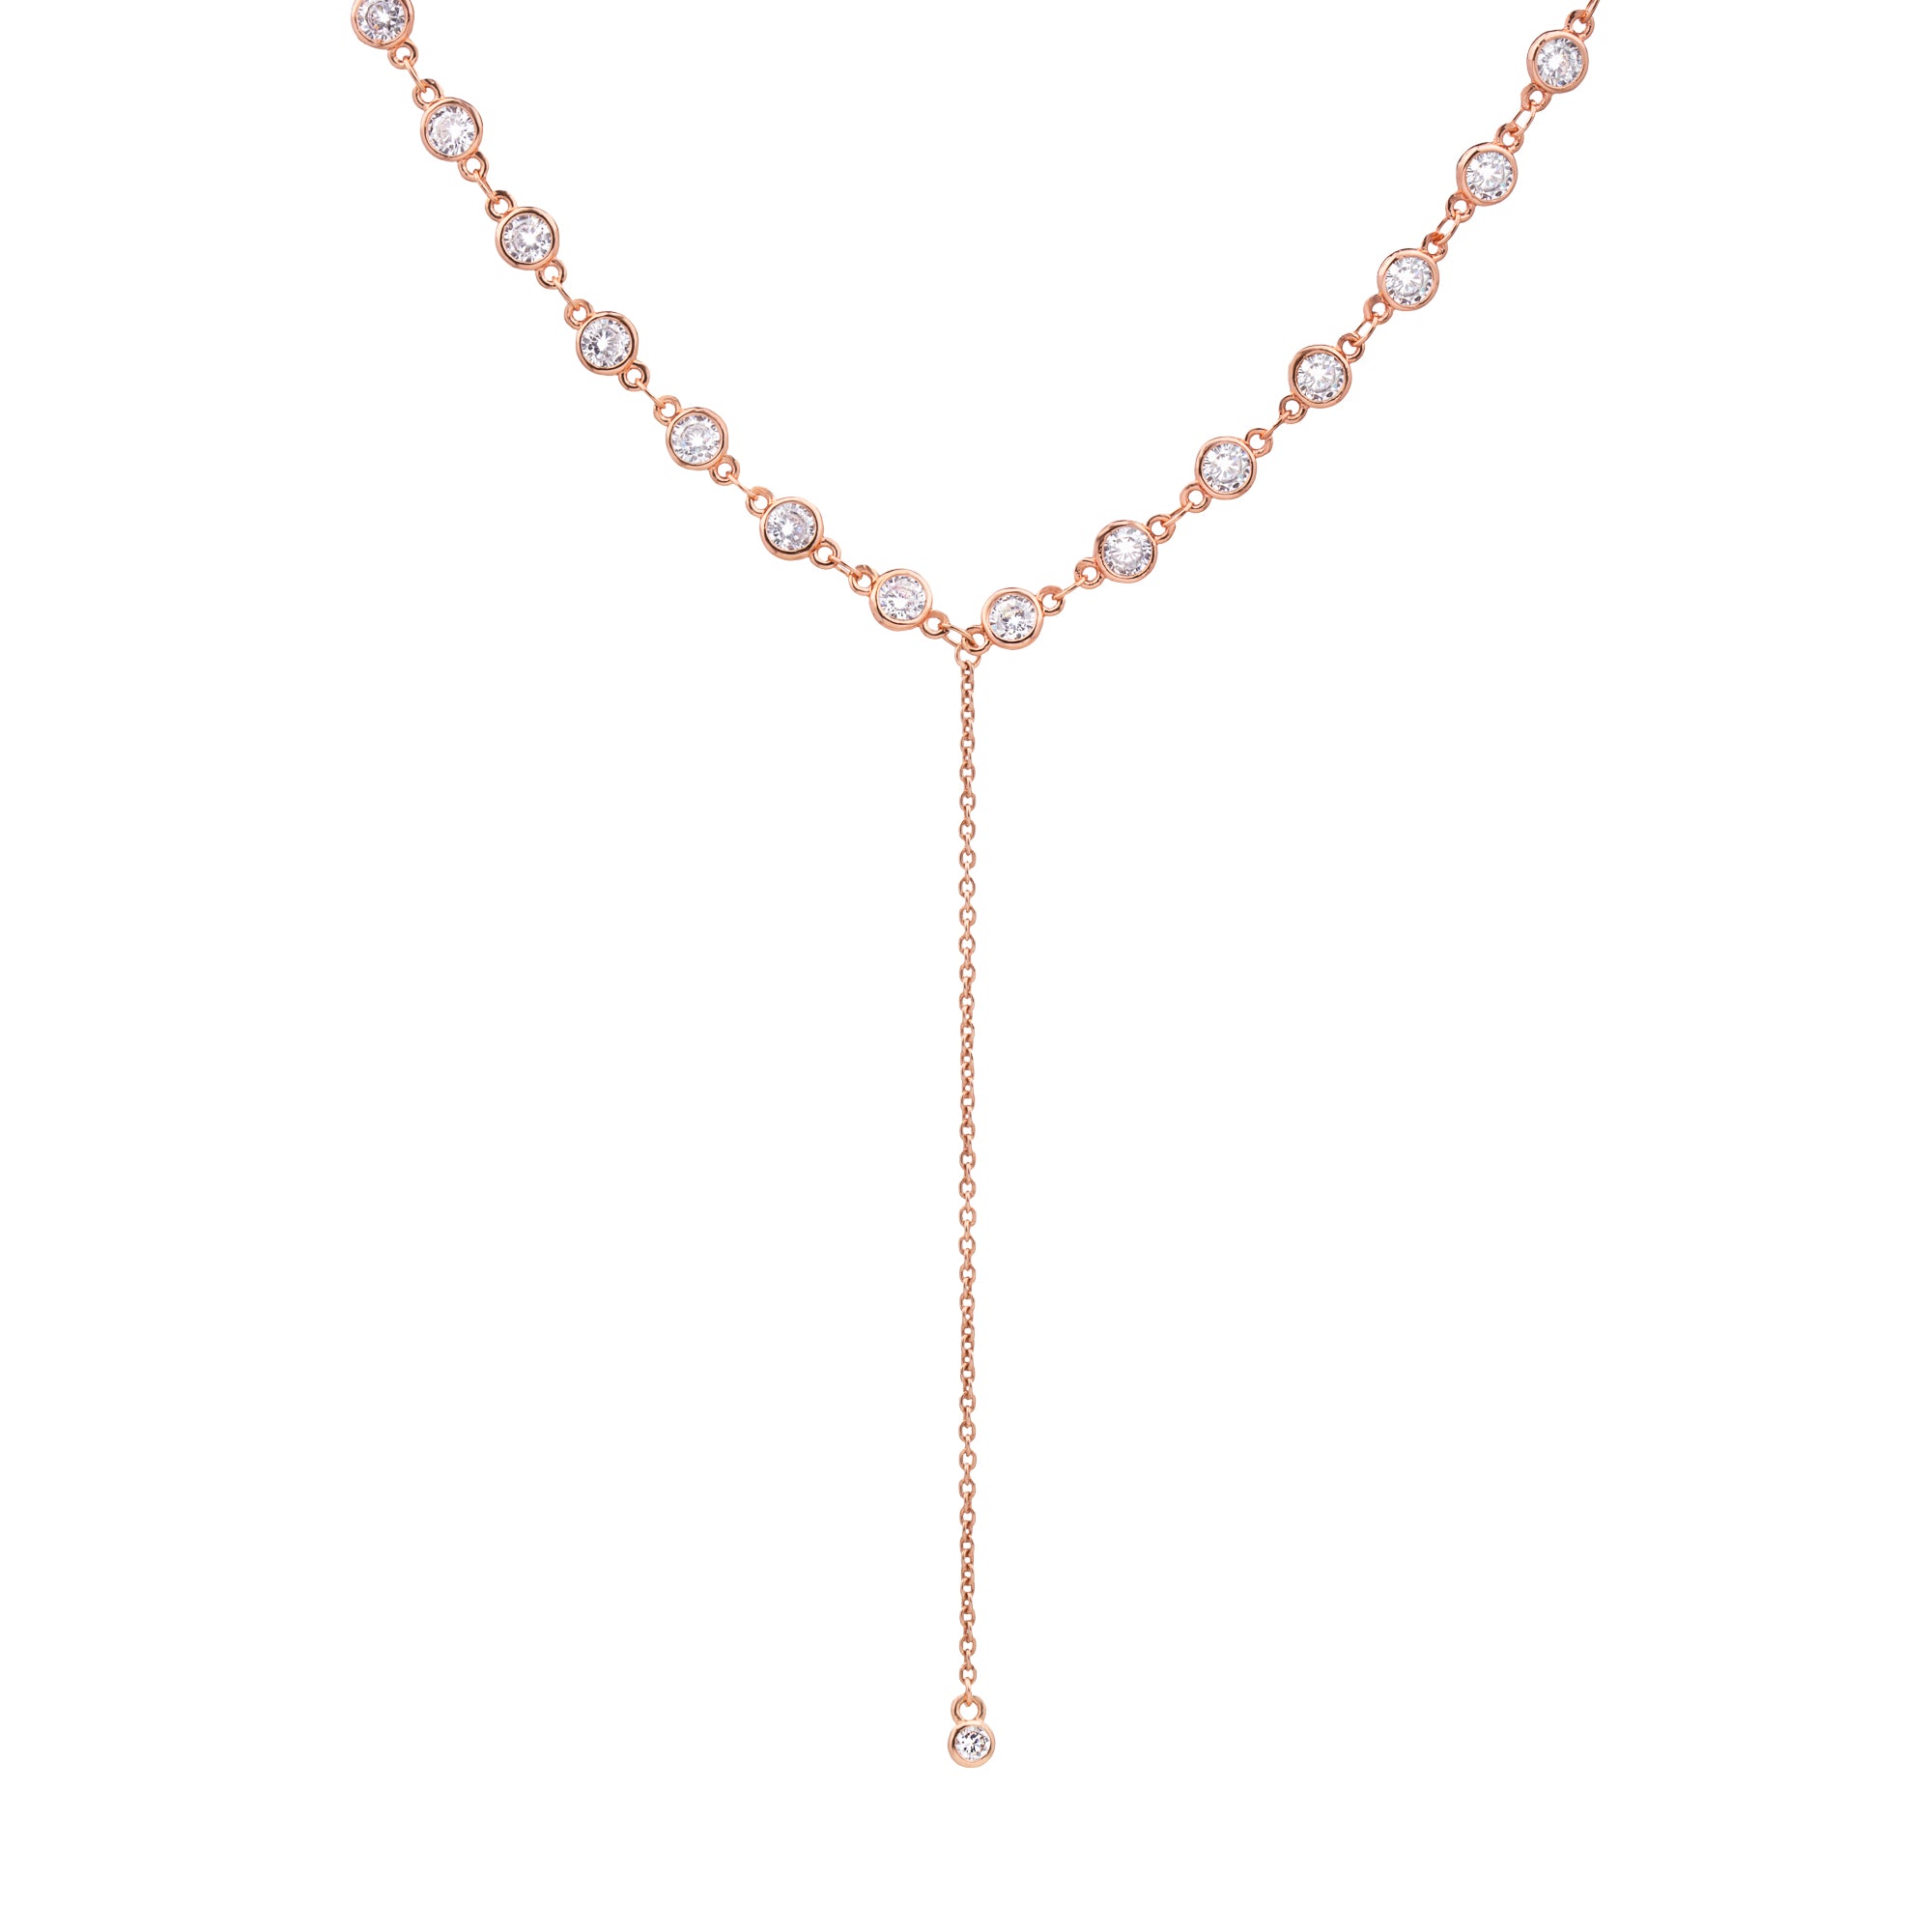 Necklace rose gold K14 with chanel design with five pendants distributed in  the necklace